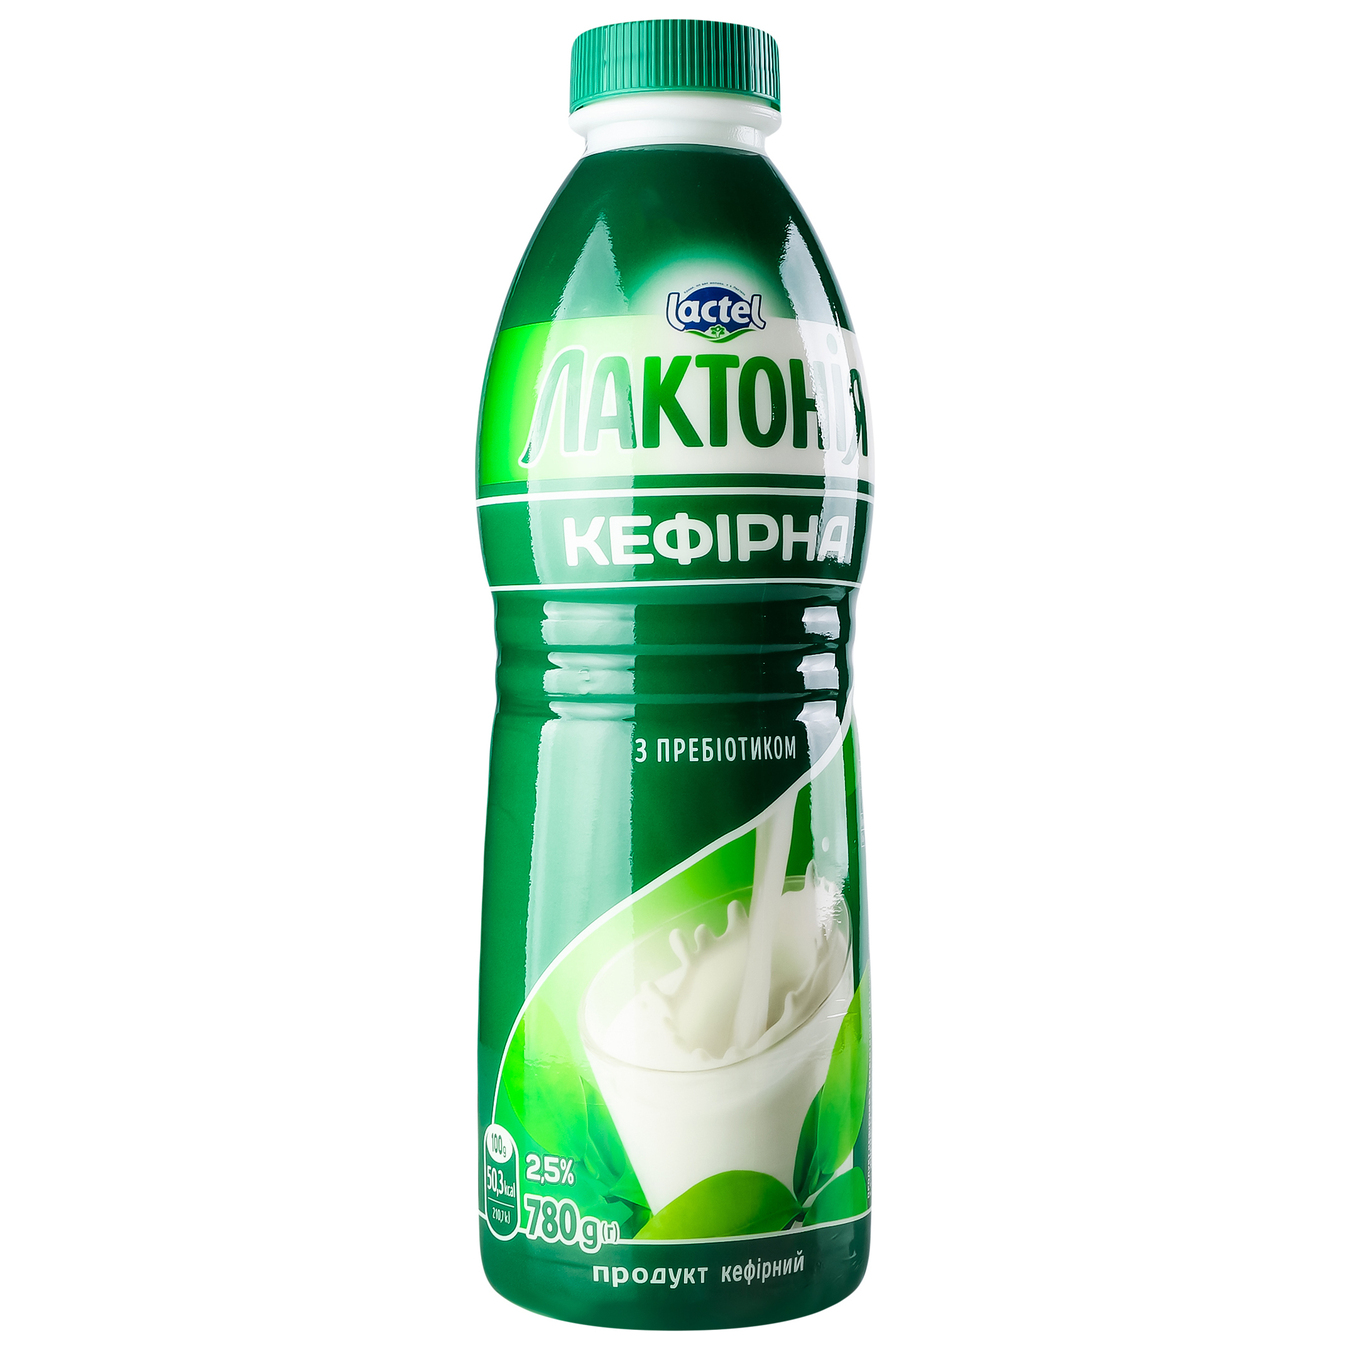 Lactonia Kefir product with lactulose prebiotic 2.5% 780g 4